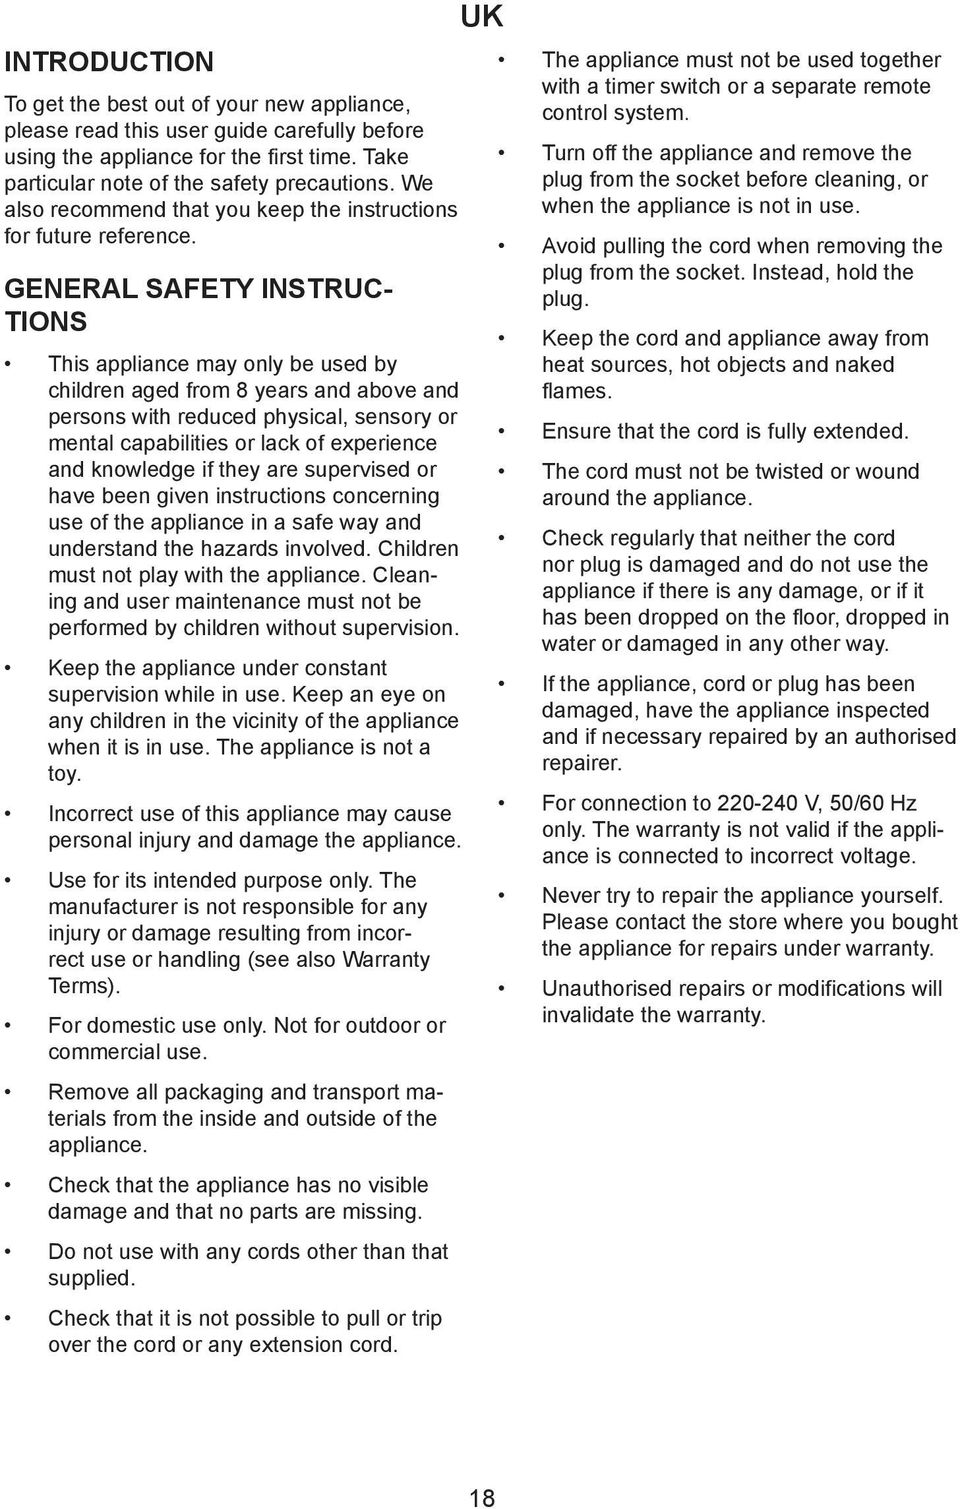 GENERAL SAFETY INSTRUC- TIONS This appliance may only be used by children aged from 8 years and above and persons with reduced physical, sensory or mental capabilities or lack of experience and